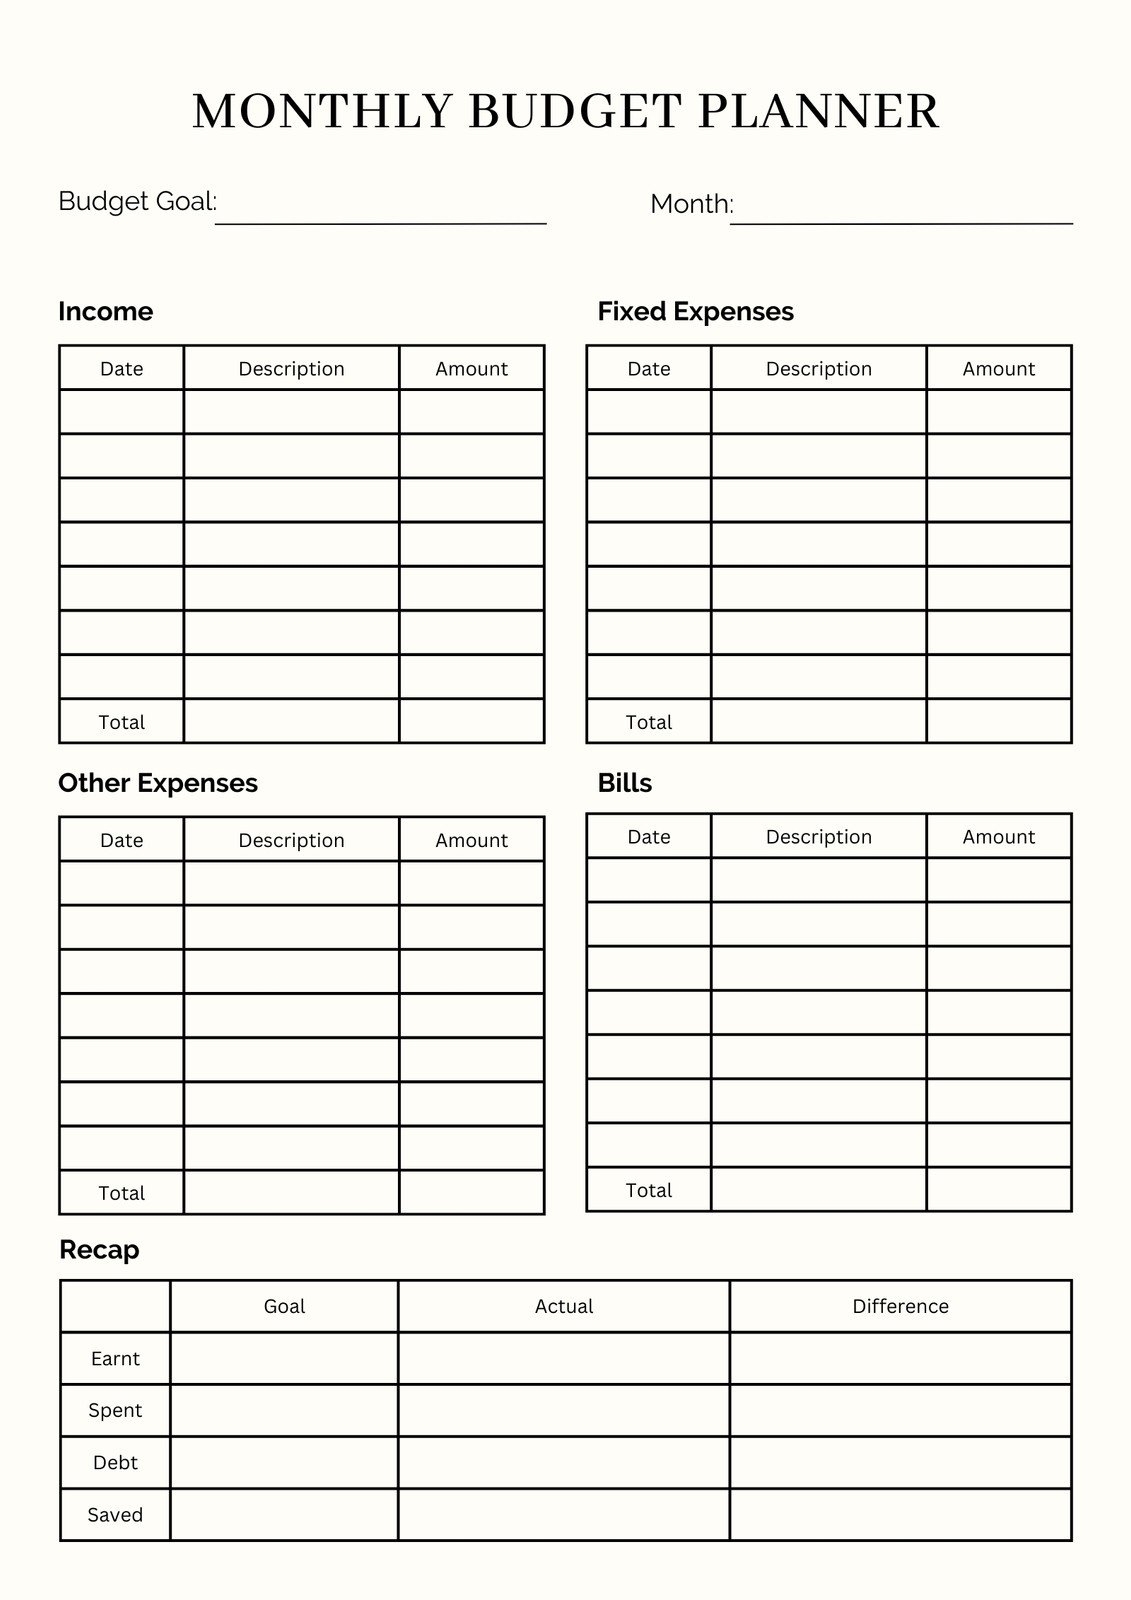 Free And Customizable Budget Templates - Free Printable Budget Templates